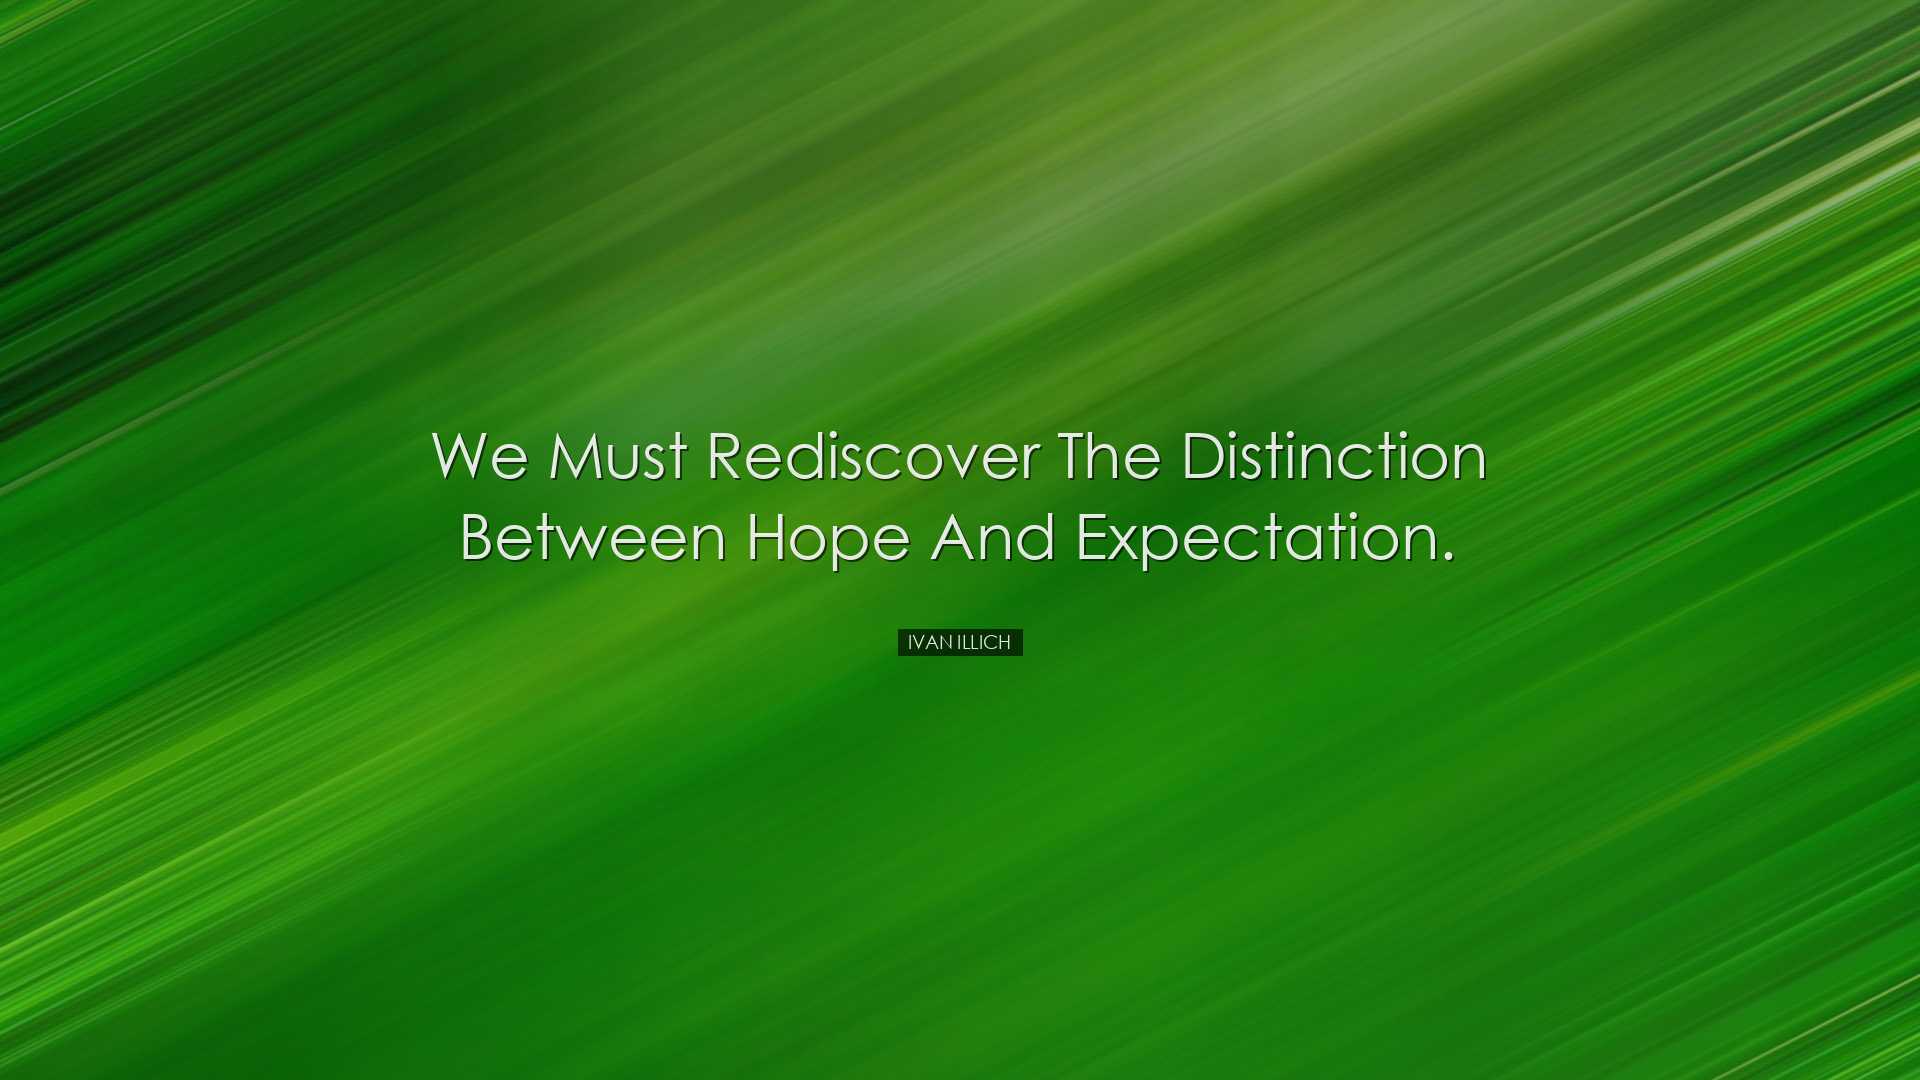 We must rediscover the distinction between hope and expectation. -